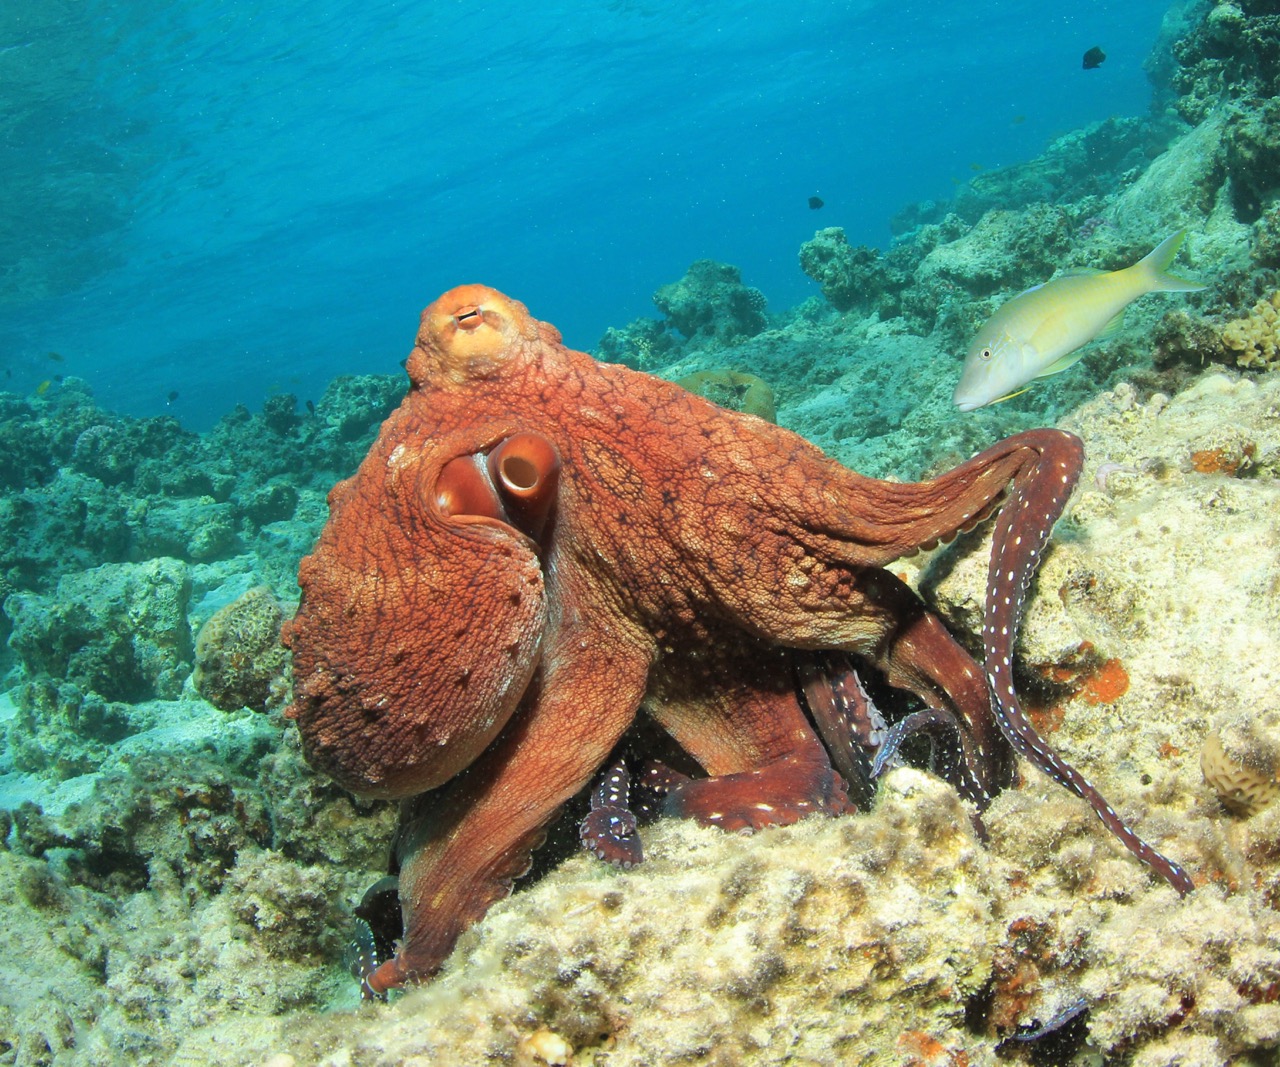 An octopus on a reef, and the subject of debate about whether octopuses, octopi or octopodes is the correct pluralisation